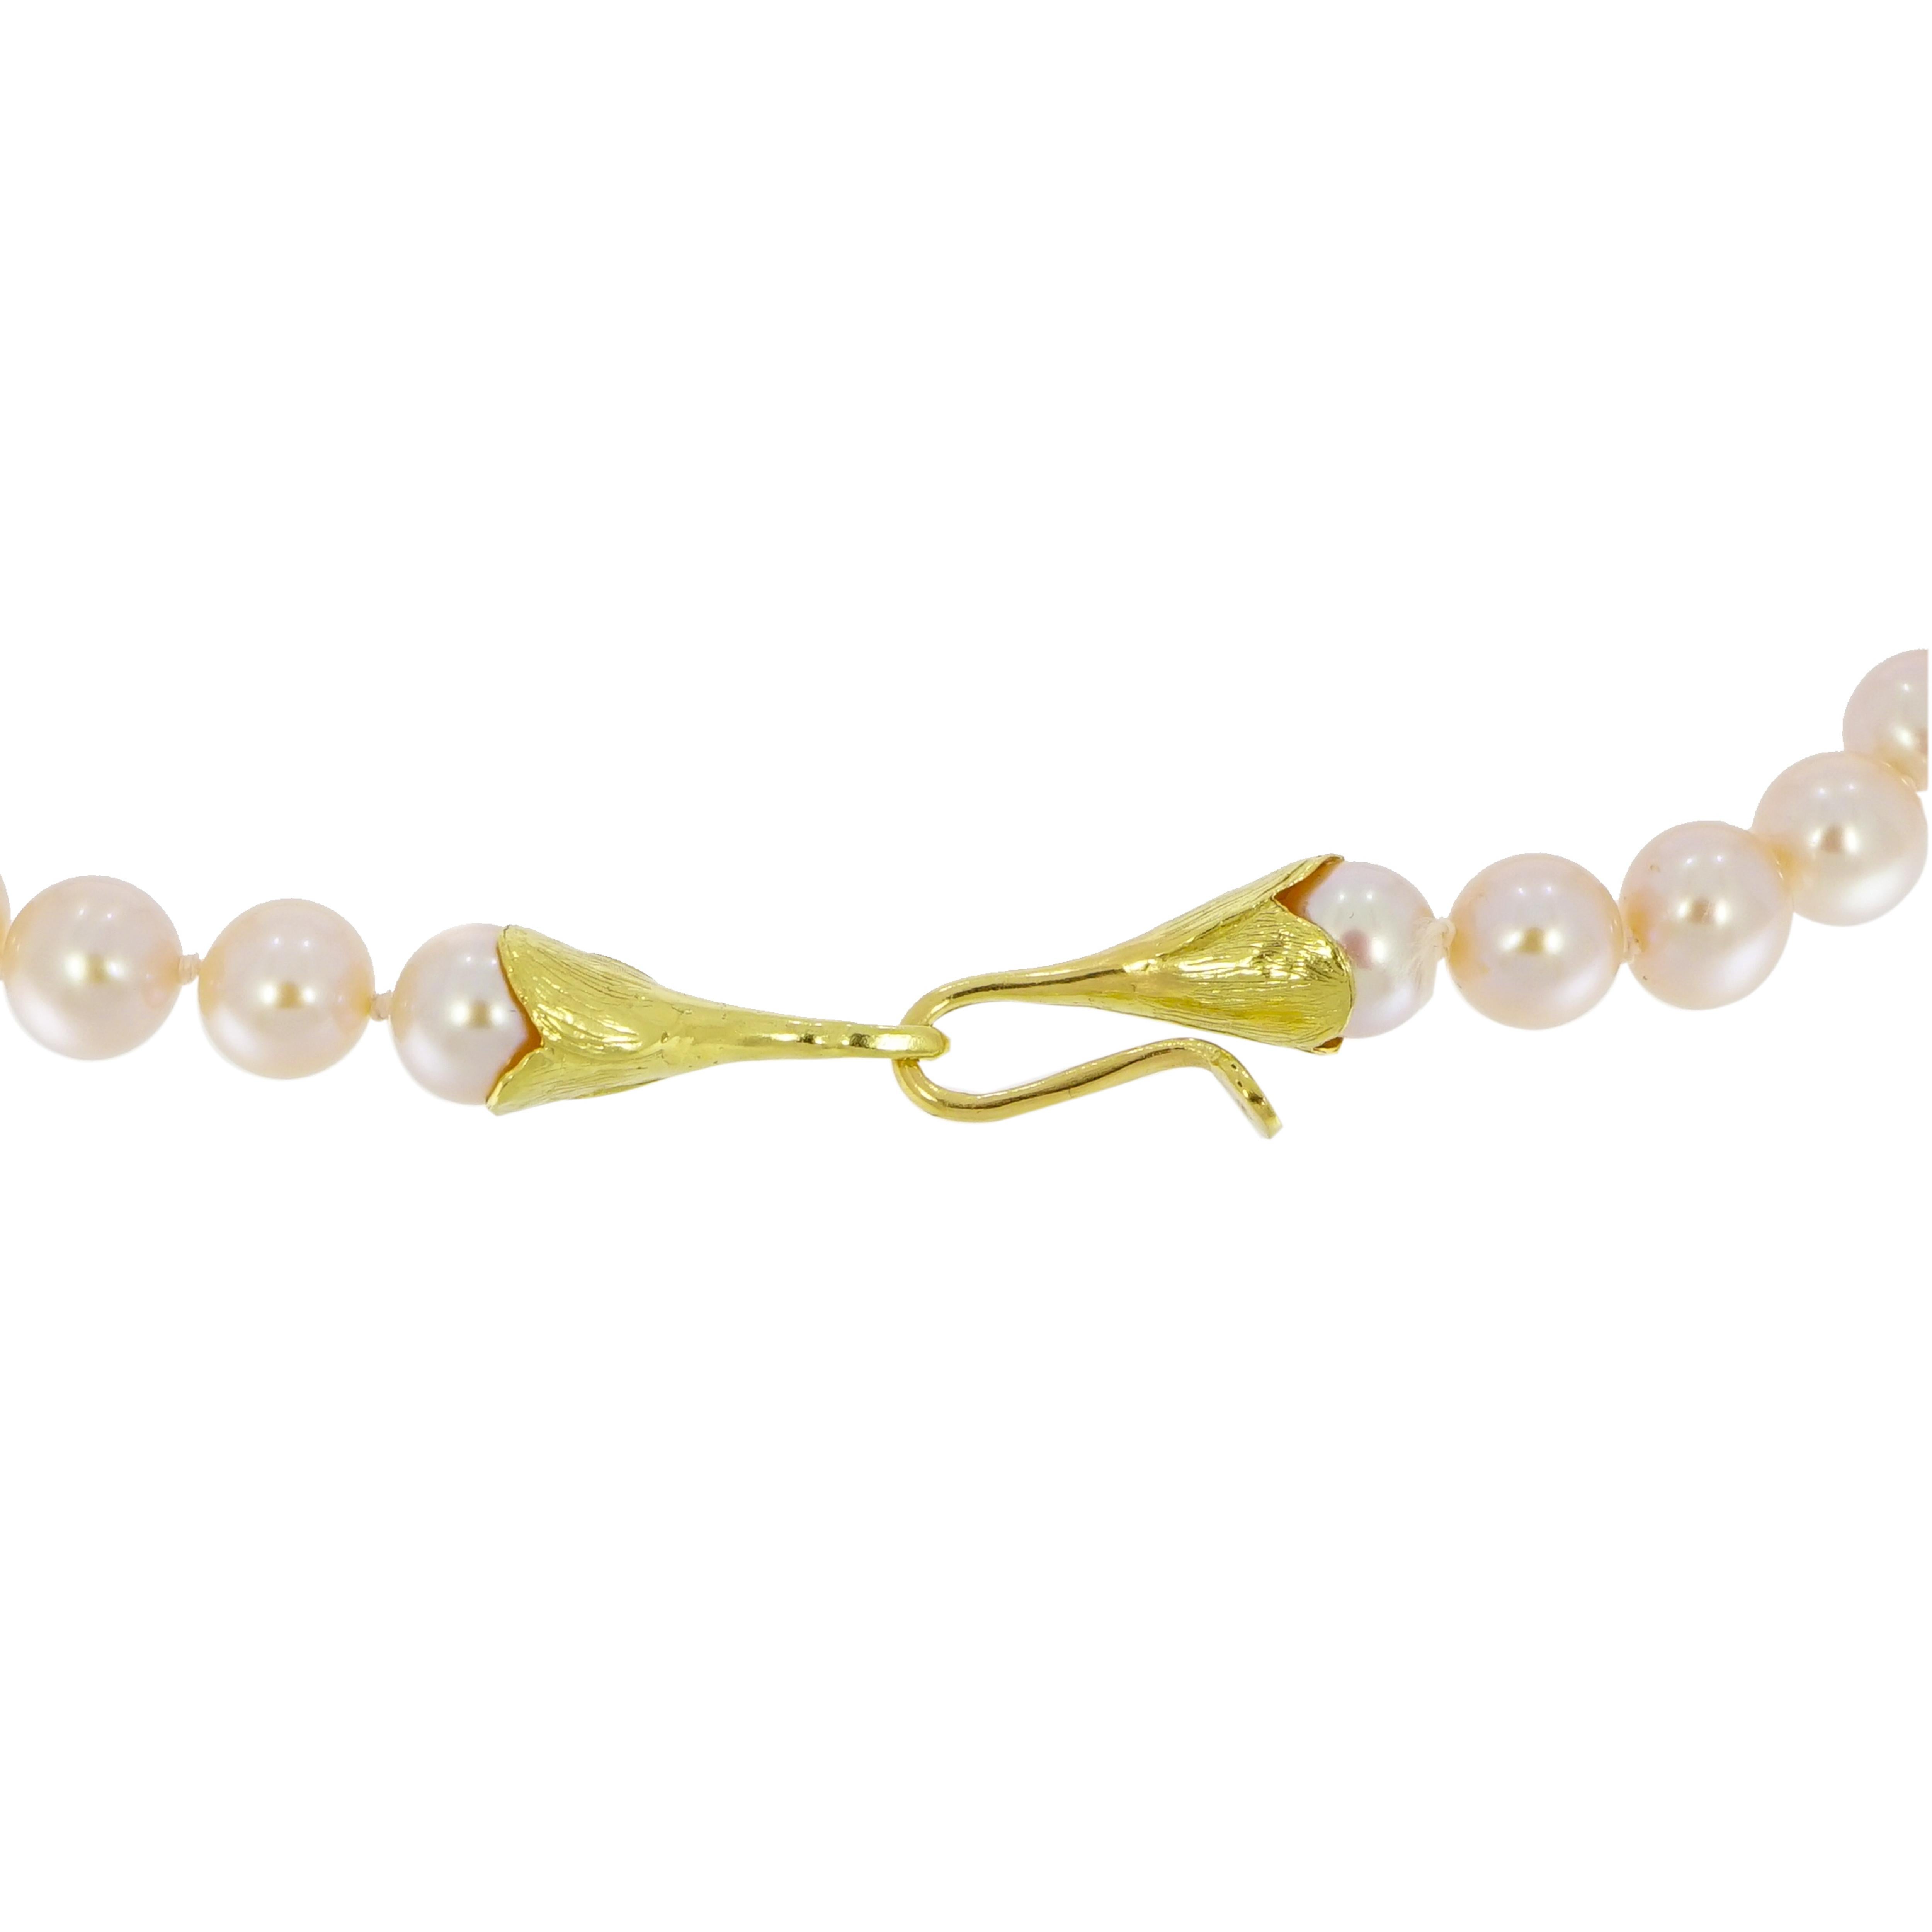 Romantic... Precious and Feminine!!! 
This classic pearl necklace is comprised of 19 inch string of pink with peach overtone pearls and finished with a handmade 18k yellow gold hook style clasp. The pearls are 8-8.5mm in size. 

